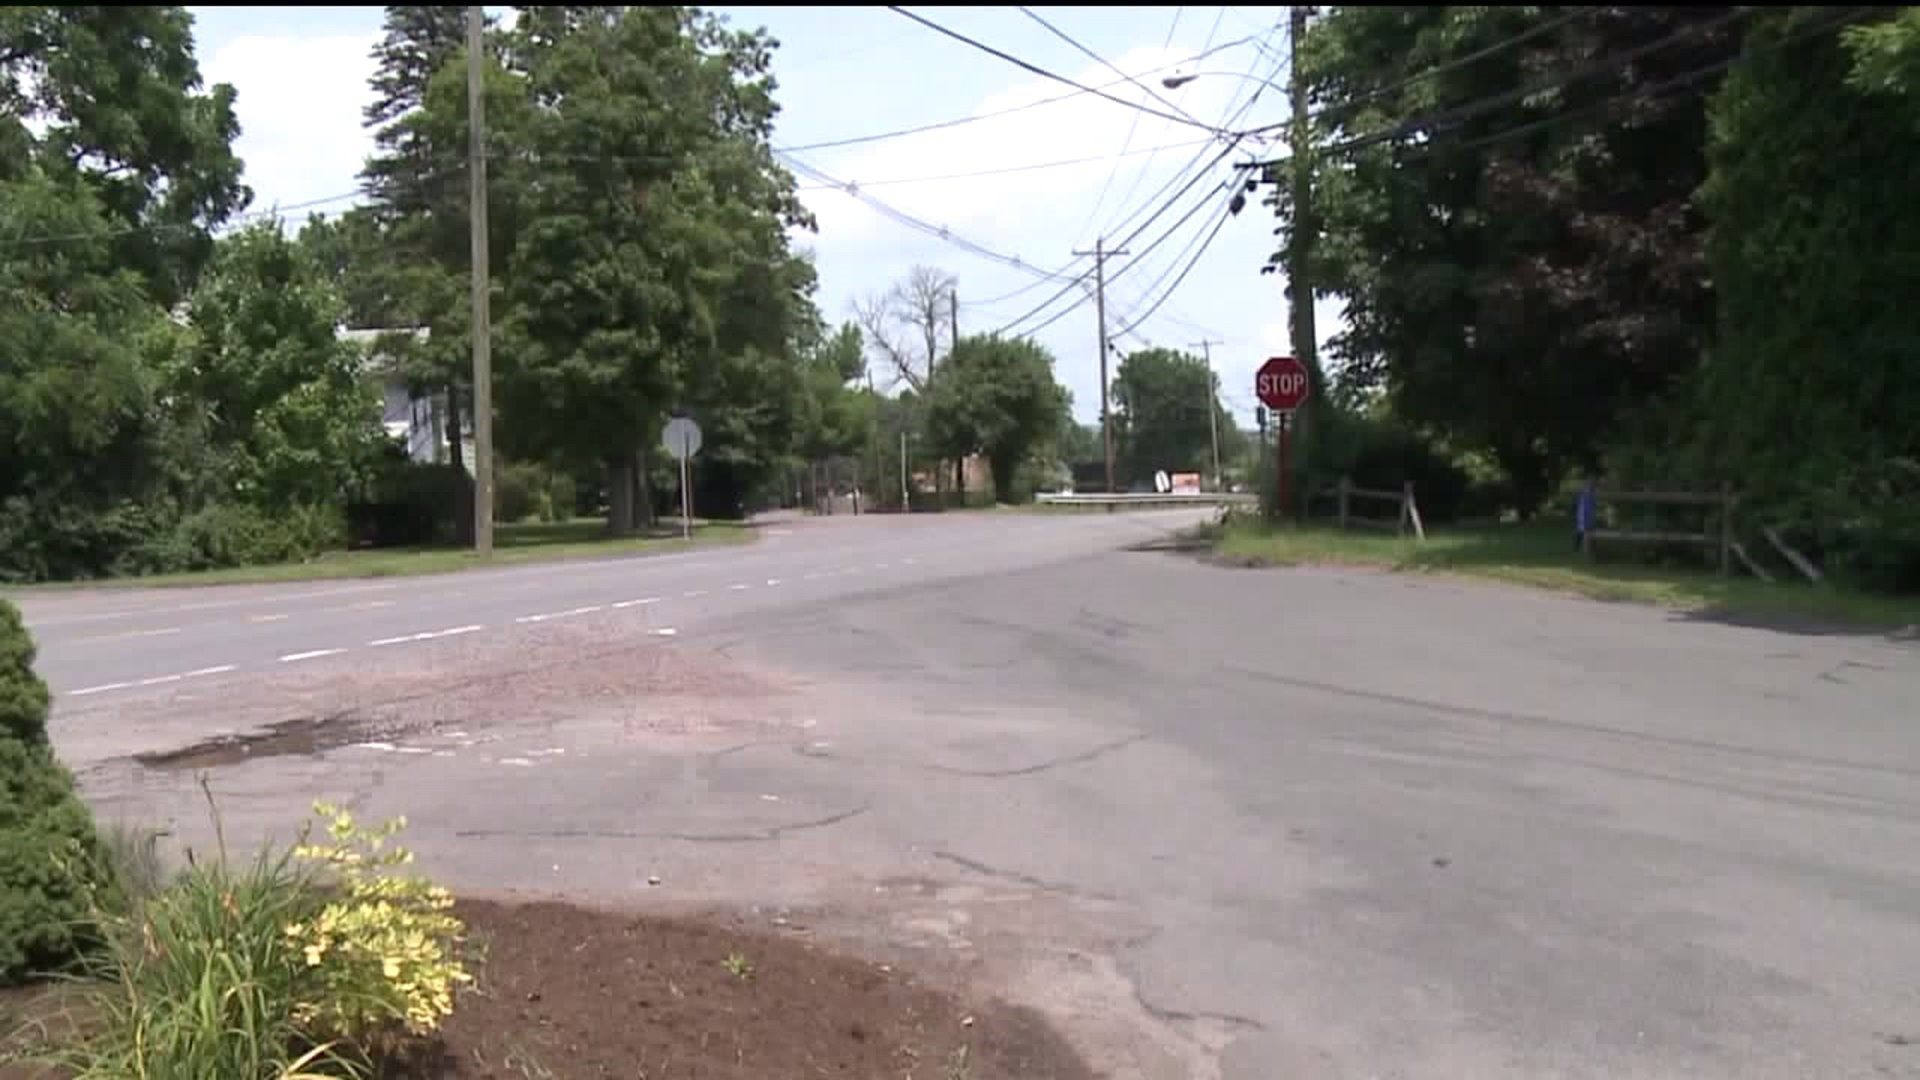 Township Official Happy after PennDOT Cancels Roundabout